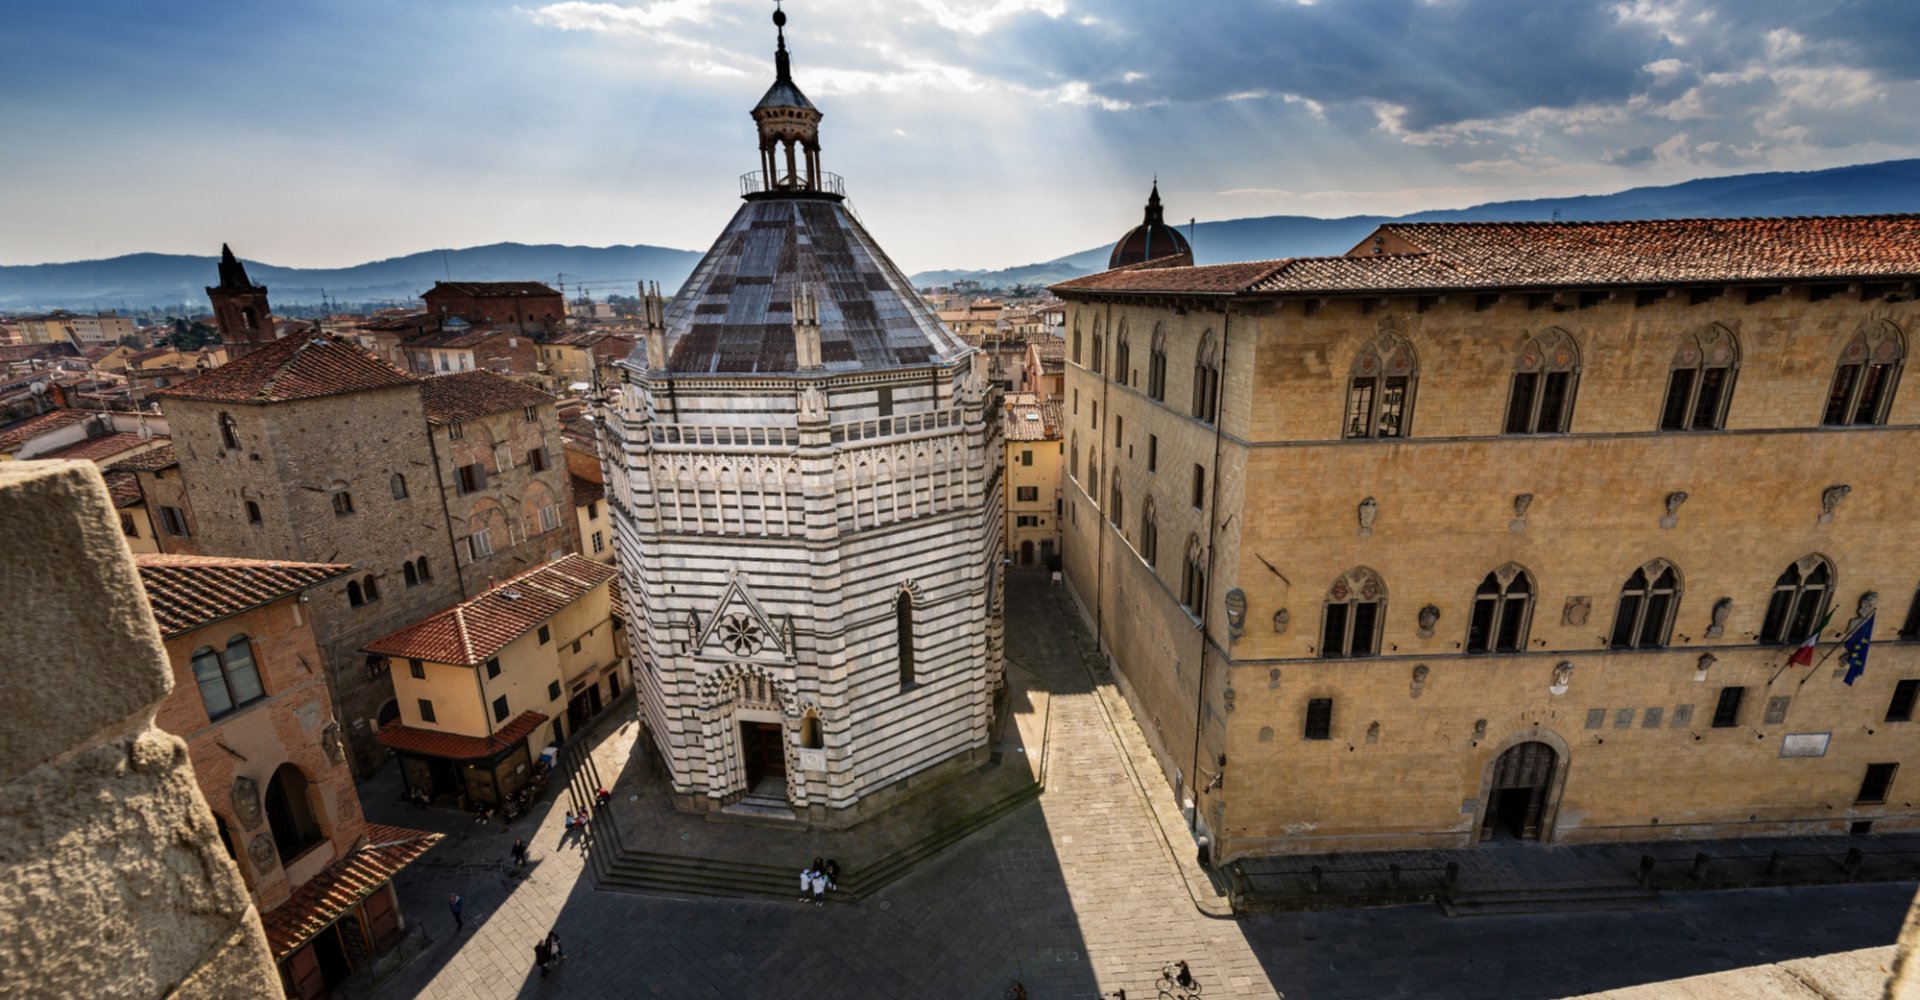 The Battistero di San Giovanni (Baptistery of St. John) in the court from the bell tower of the Cathedral of San Zeno